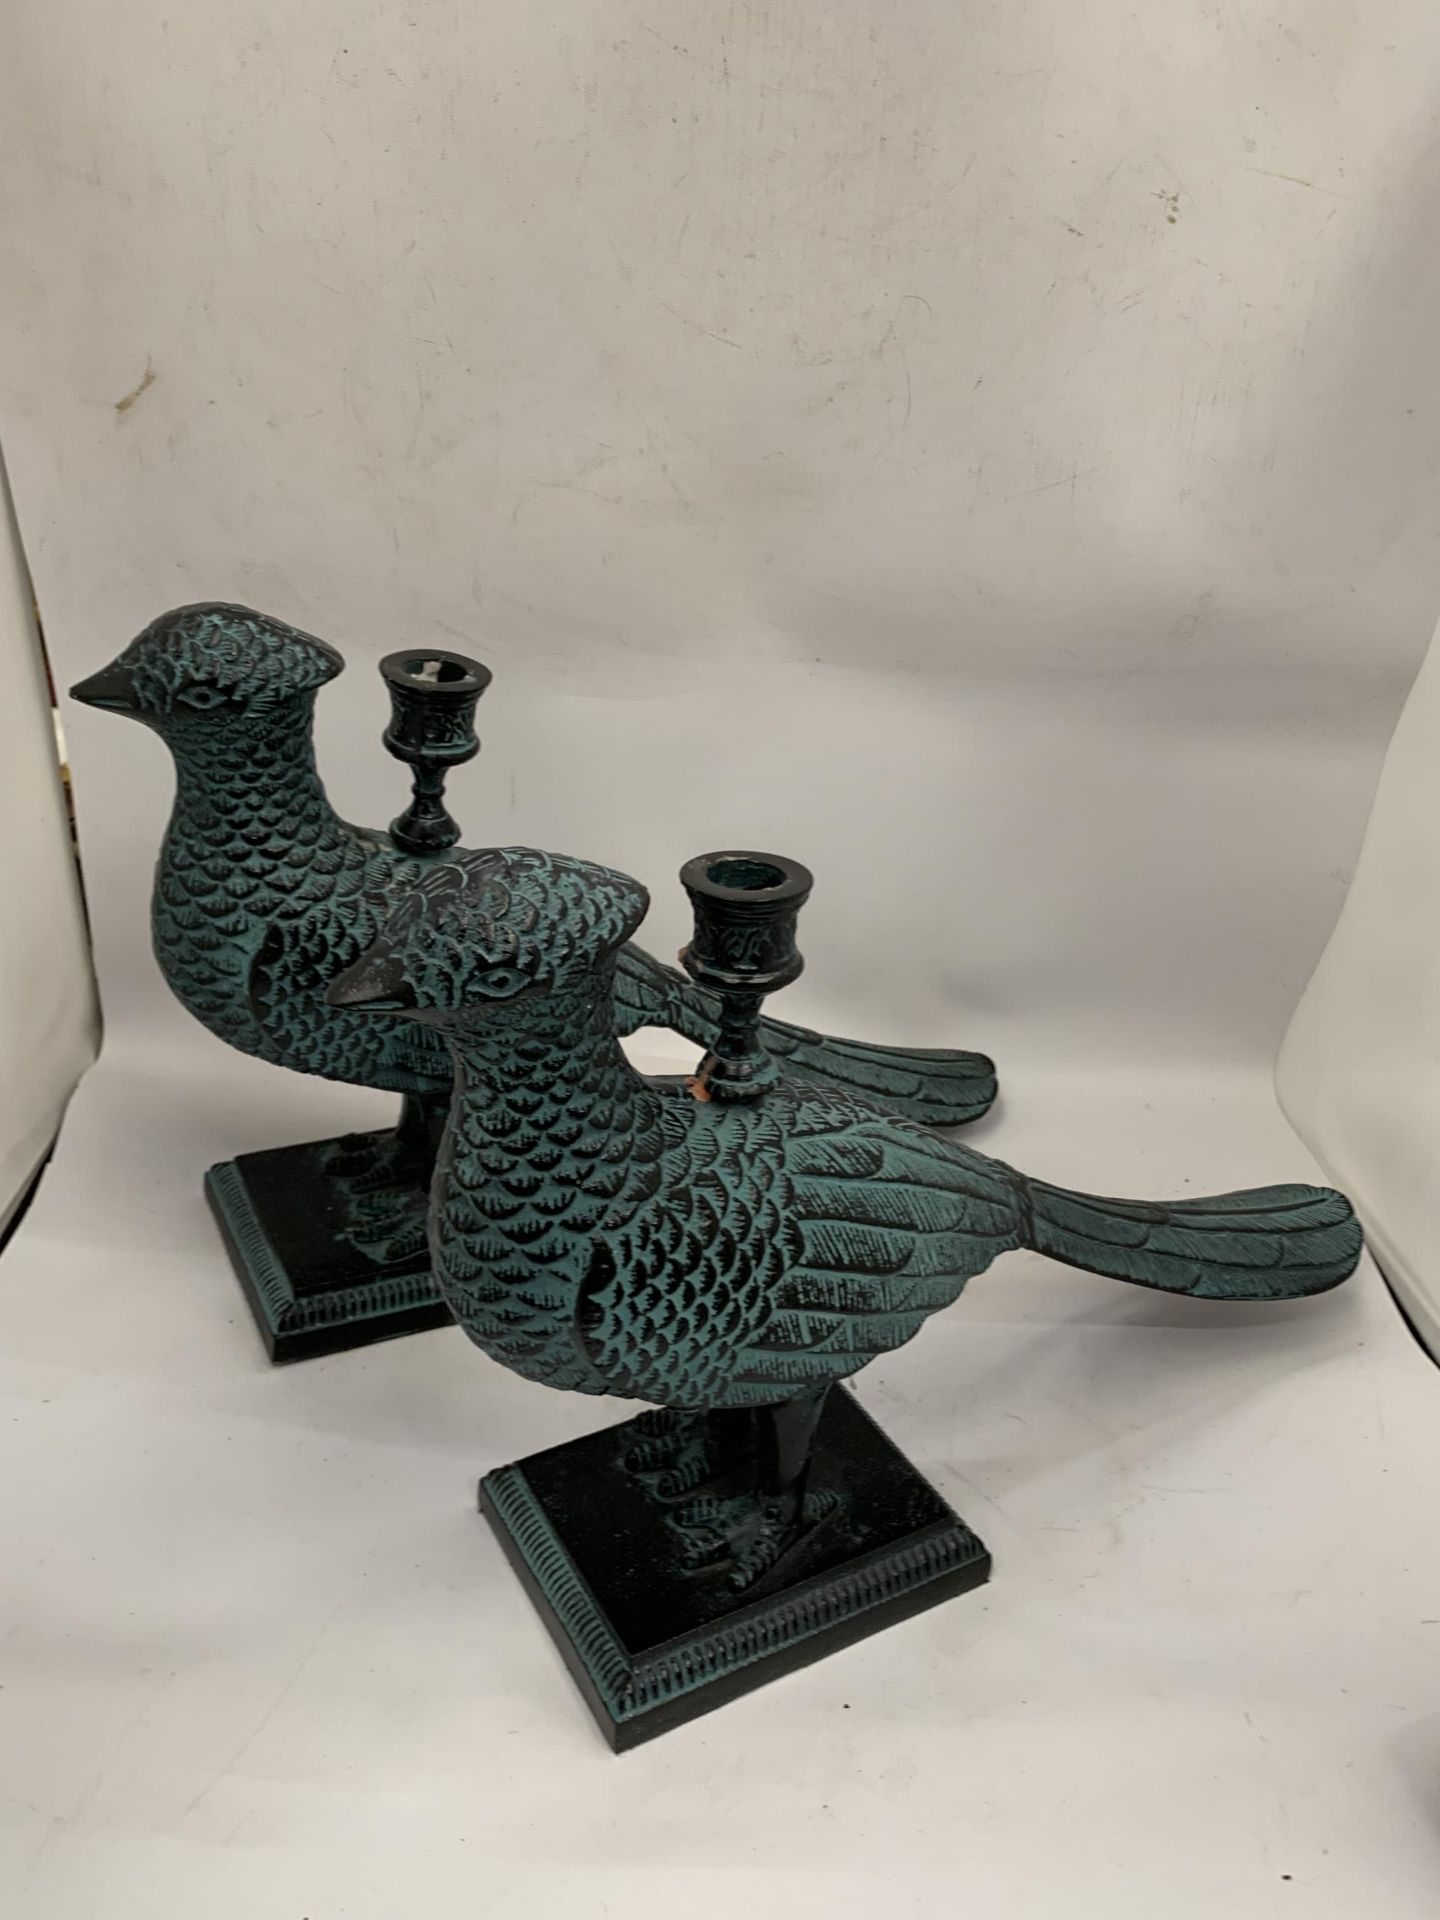 TWO UNUSUAL TURQUOISE BIRD DESIGN CANDLE HOLDERS, LENGTH 36CM - Image 2 of 3